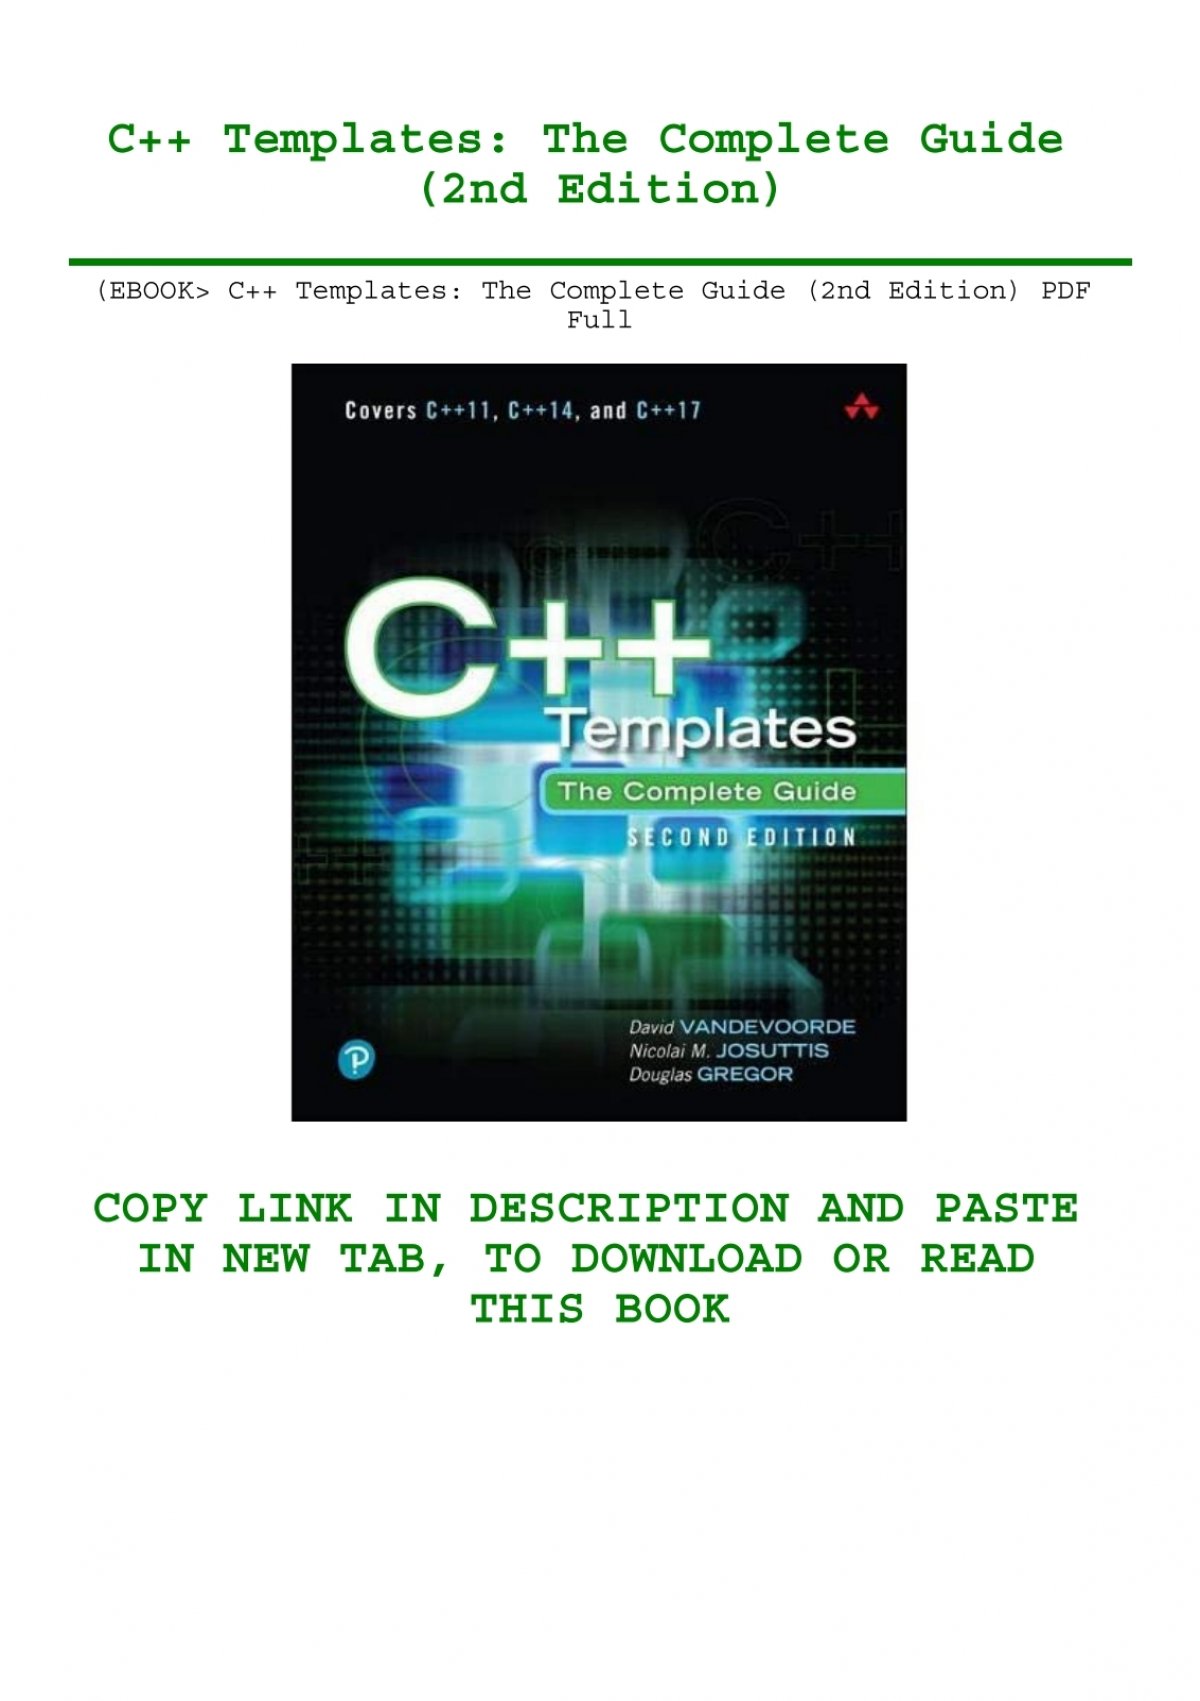 ebook-c-templates-the-complete-guide-2nd-edition-pdf-full